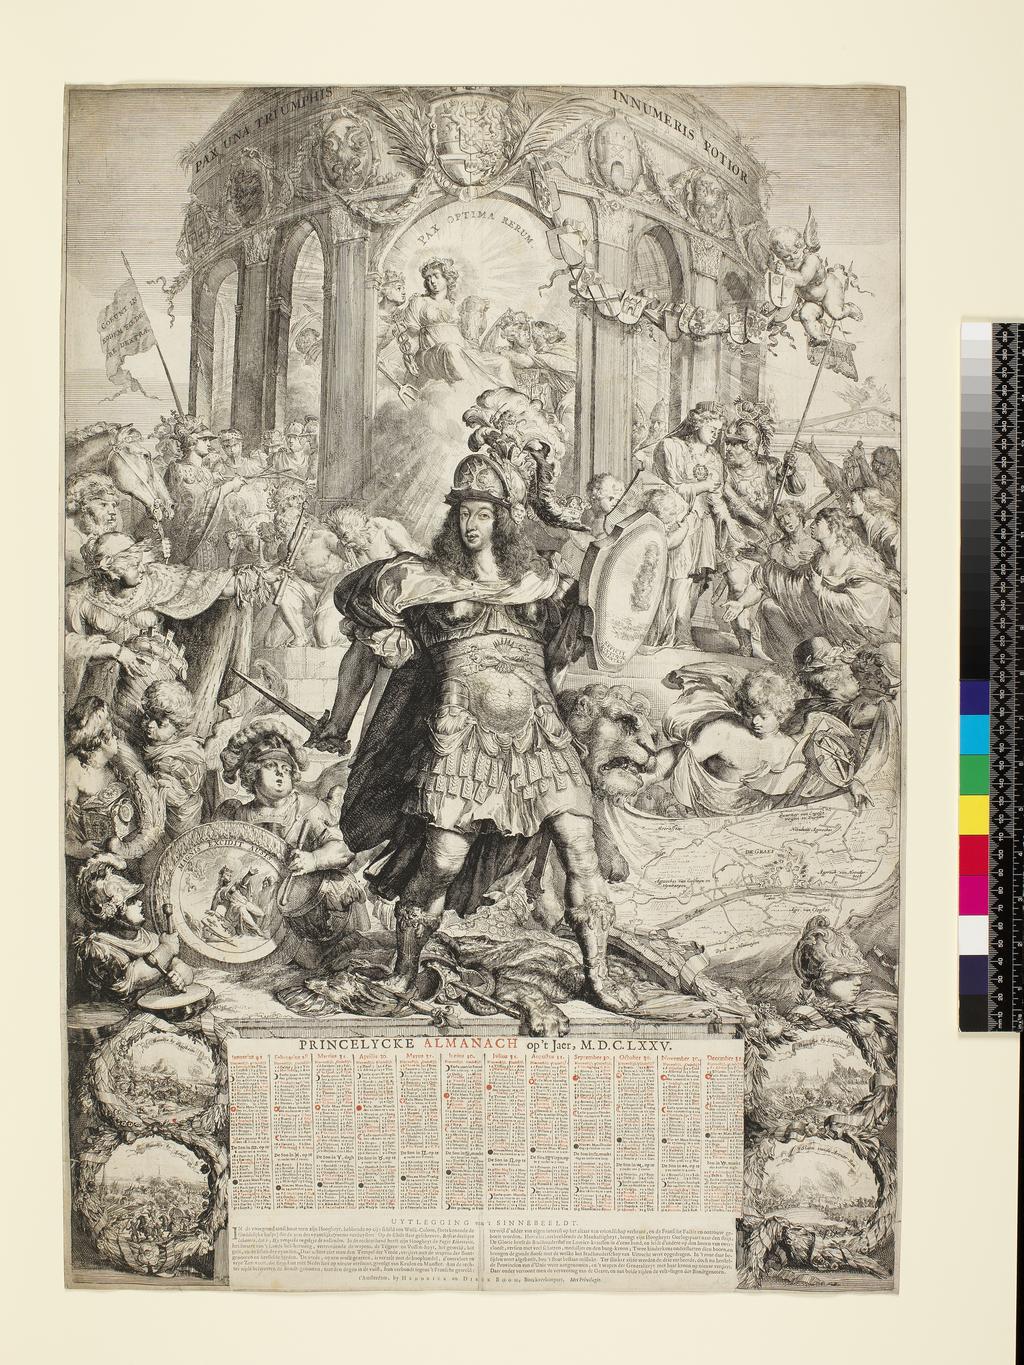 An image of Princelycke Almanach op't Jaer, MDCLXXV. Allegory with Pallas Athene in honour of Prince Willem III and his campaign 1673, with an almanac for the year 1675. Hooghe, Romeyn de (Dutch, 1645-1708). Etching, letterpress, colour printing (parts of the text). Black carbon ink on paper, height, sheet, 681 mm, width, sheet, 476 mm, 1675. Production Note: The almanach has been printed in black and red from letterpress on a slip of paper and pasted on the blank central lower part of the plate; below, on another slip with letterpress explanation of the allegory ('Uytlegging van't Sinnebeeldt') and the address of the publisher, Hendrick en Dirck Boom.